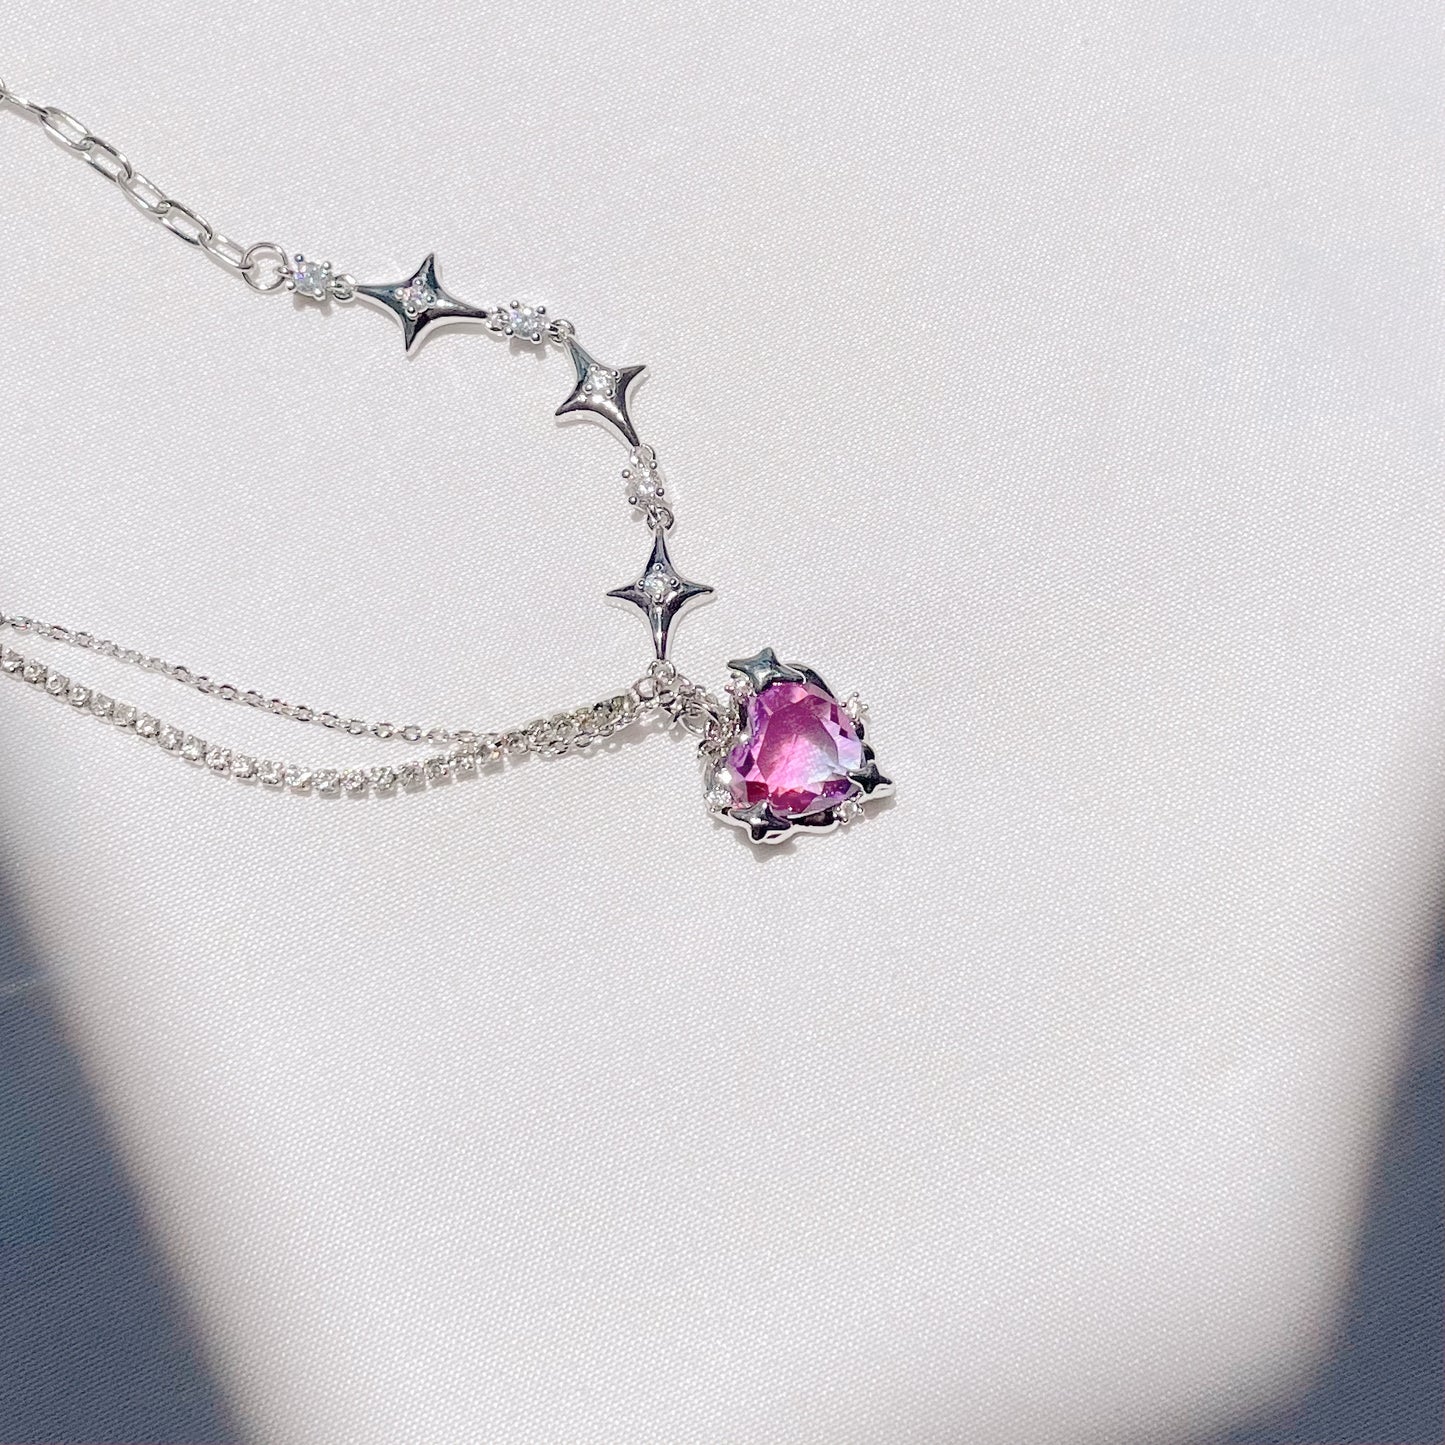 Lizz- Melted Heart Necklace